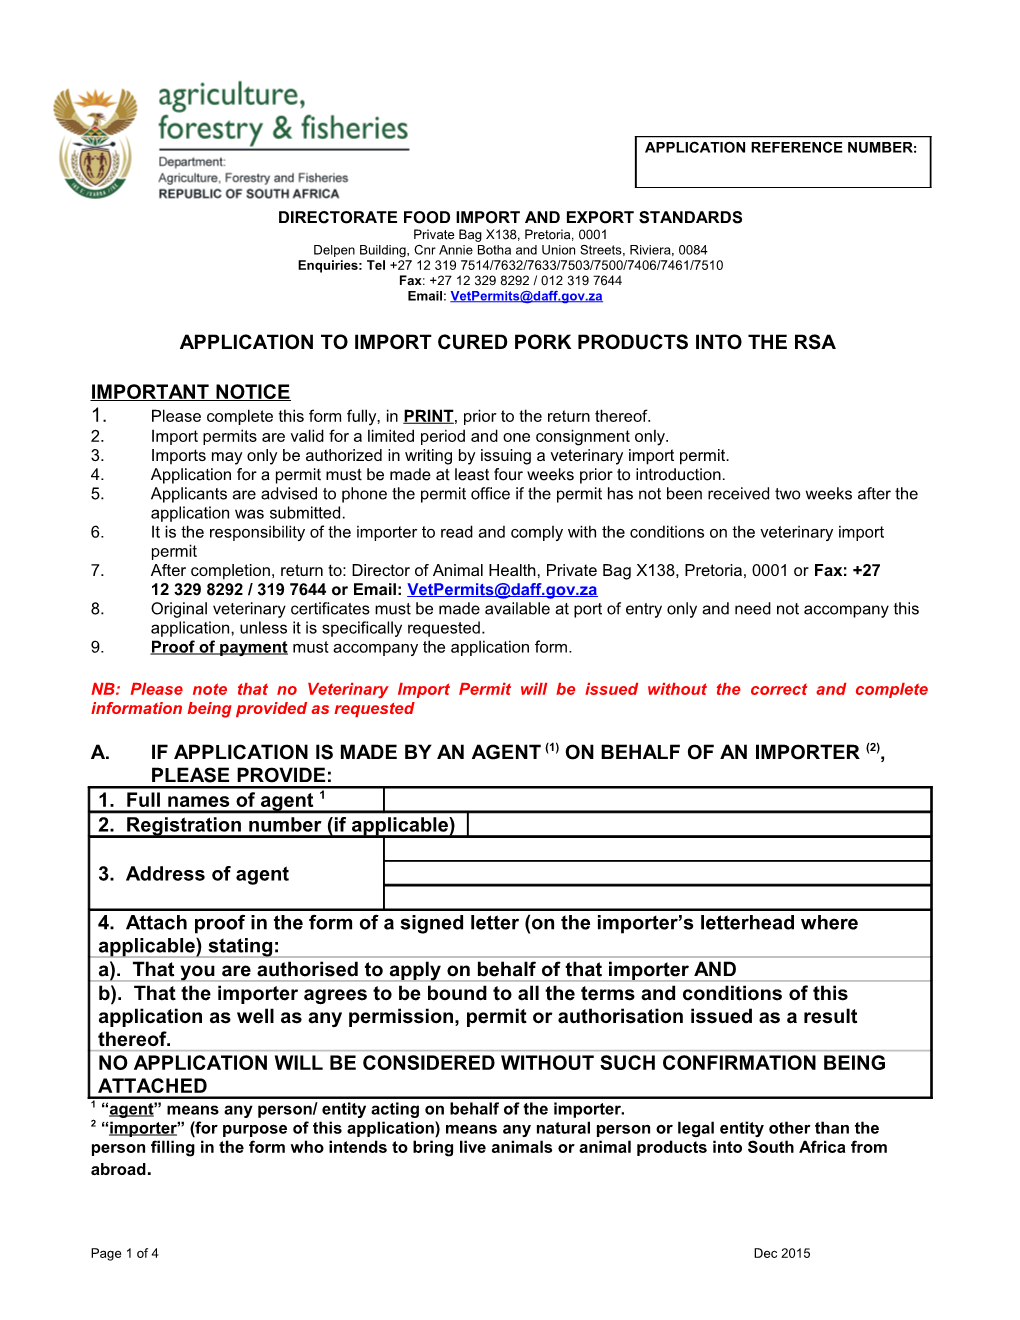 Directorate Food Import and Export Standards